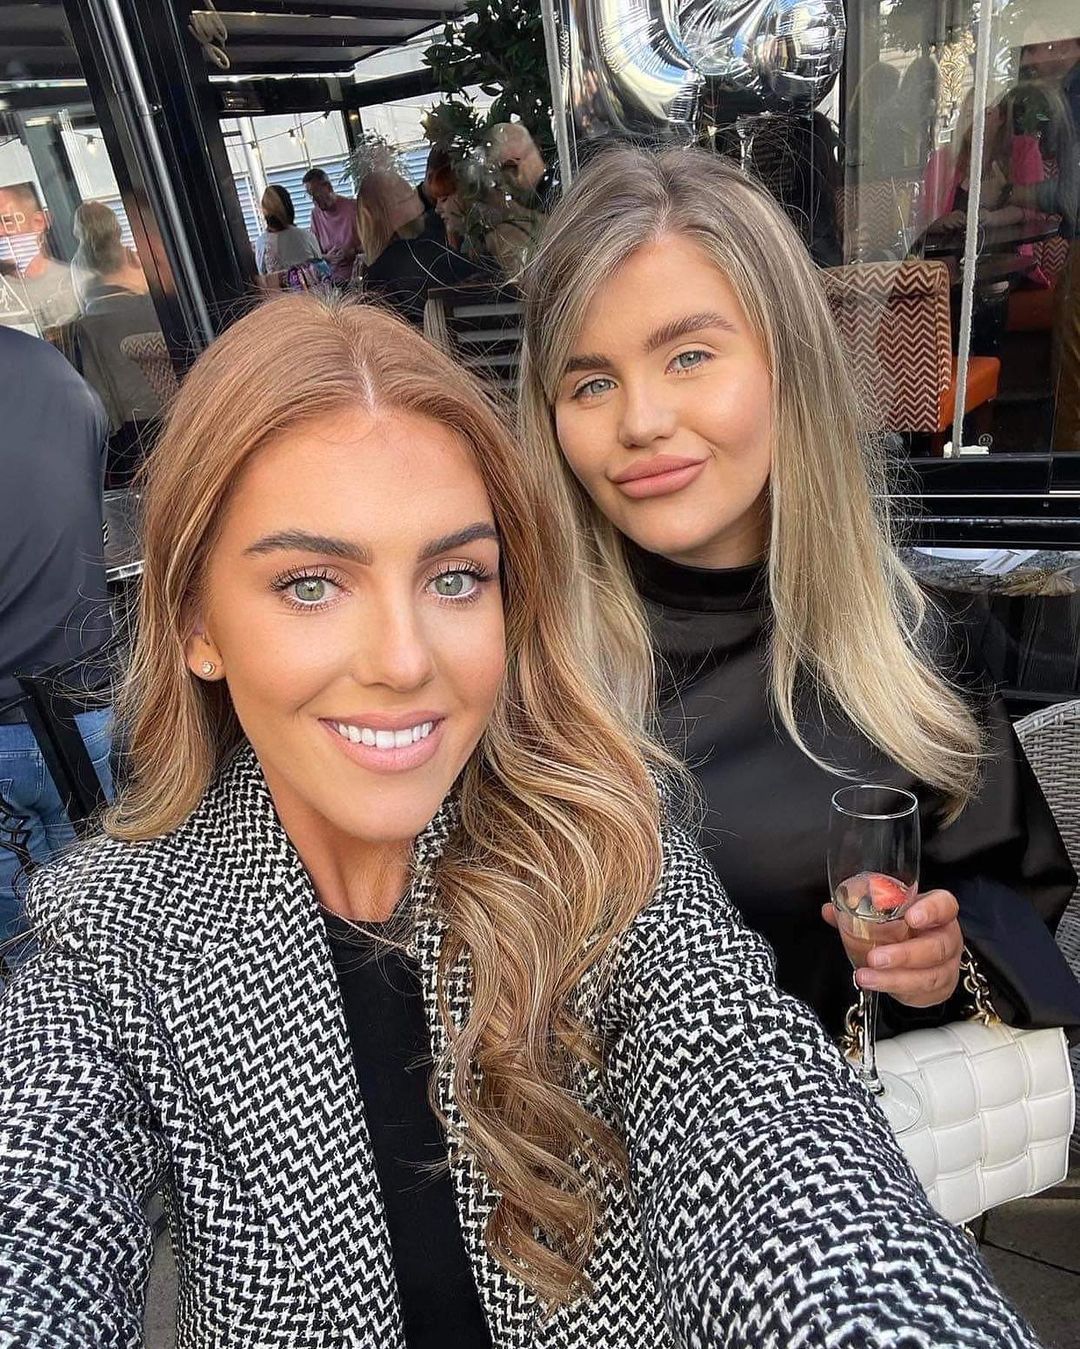 Gogglebox stars Abbie and Georgia look very different as they glam up away from the sofa